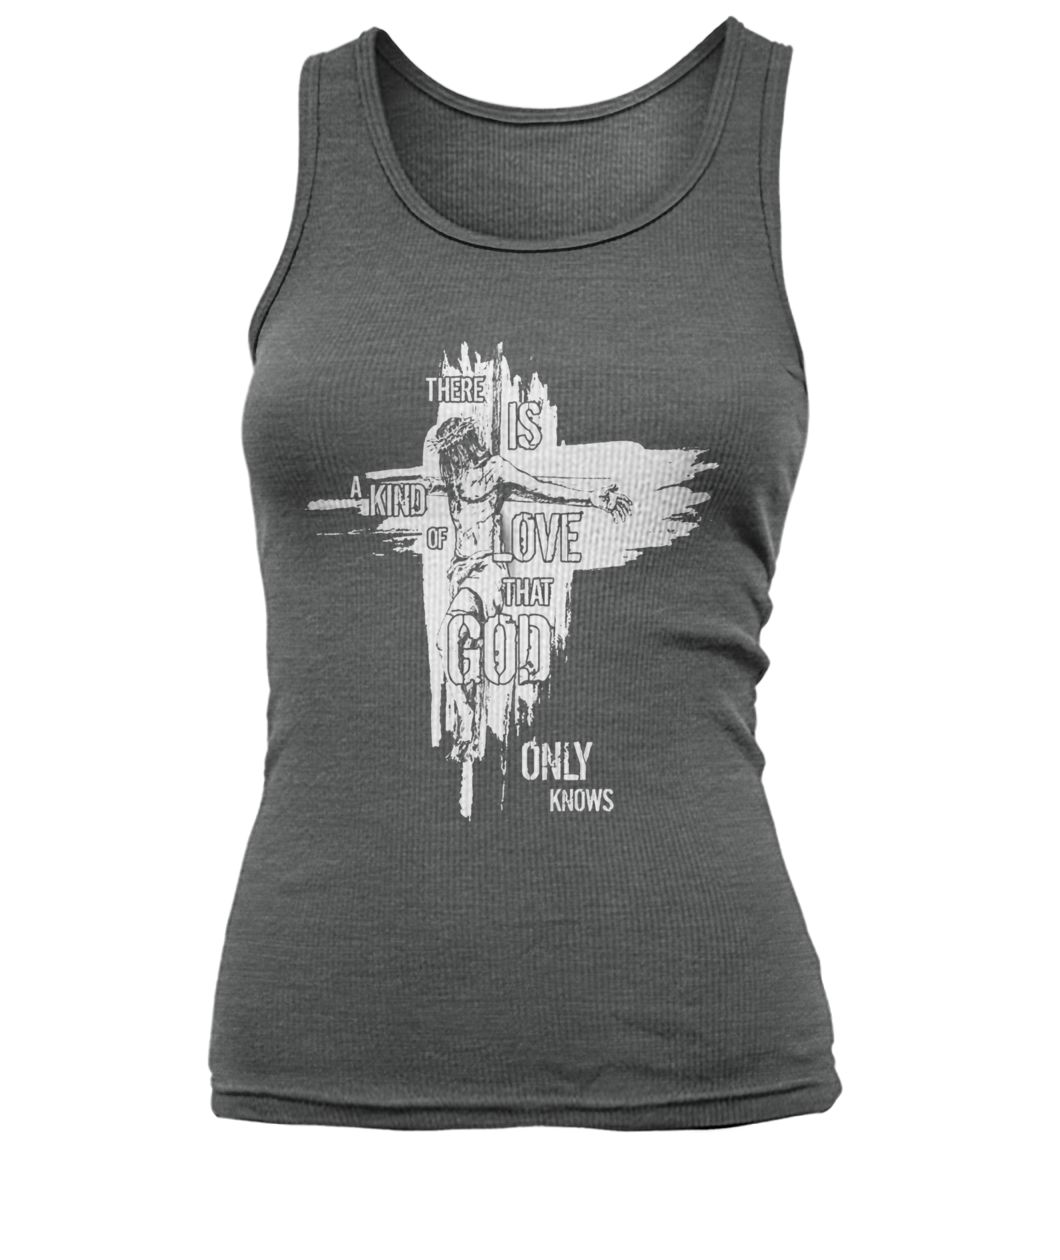 There is a kind of love that god only knows faith cross women's tank top